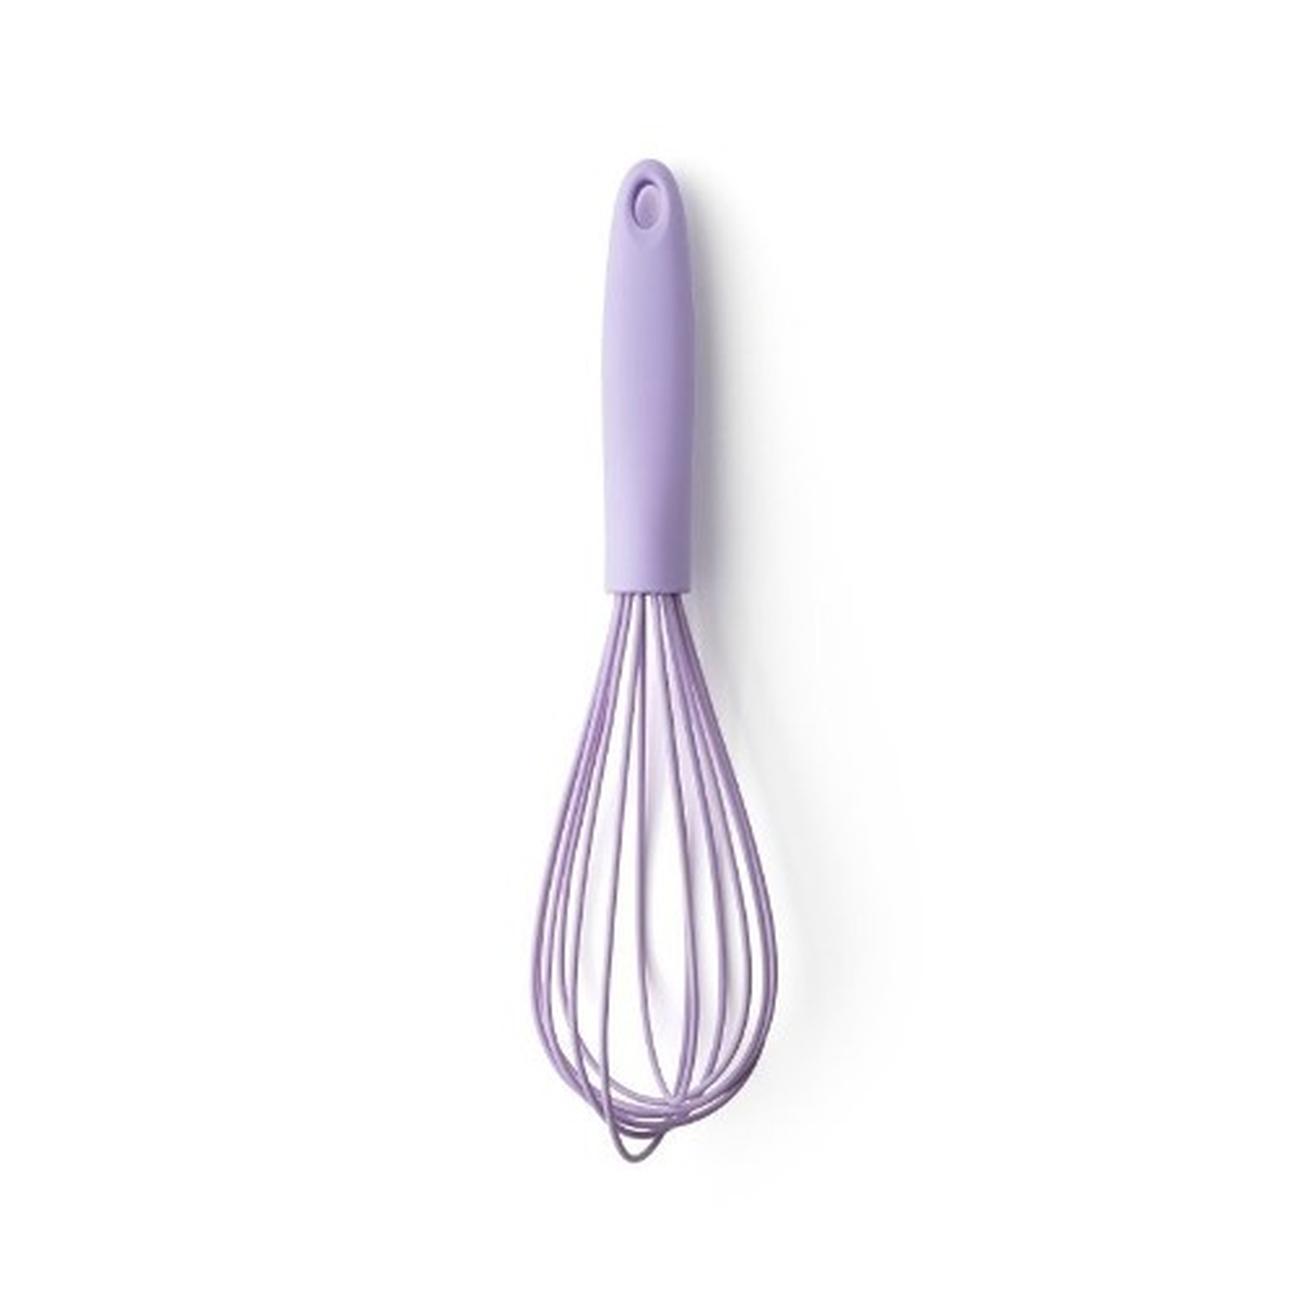 te-silicone-whisk-lavender - Taylor's Eye Witness Lavender Silicone Whisk